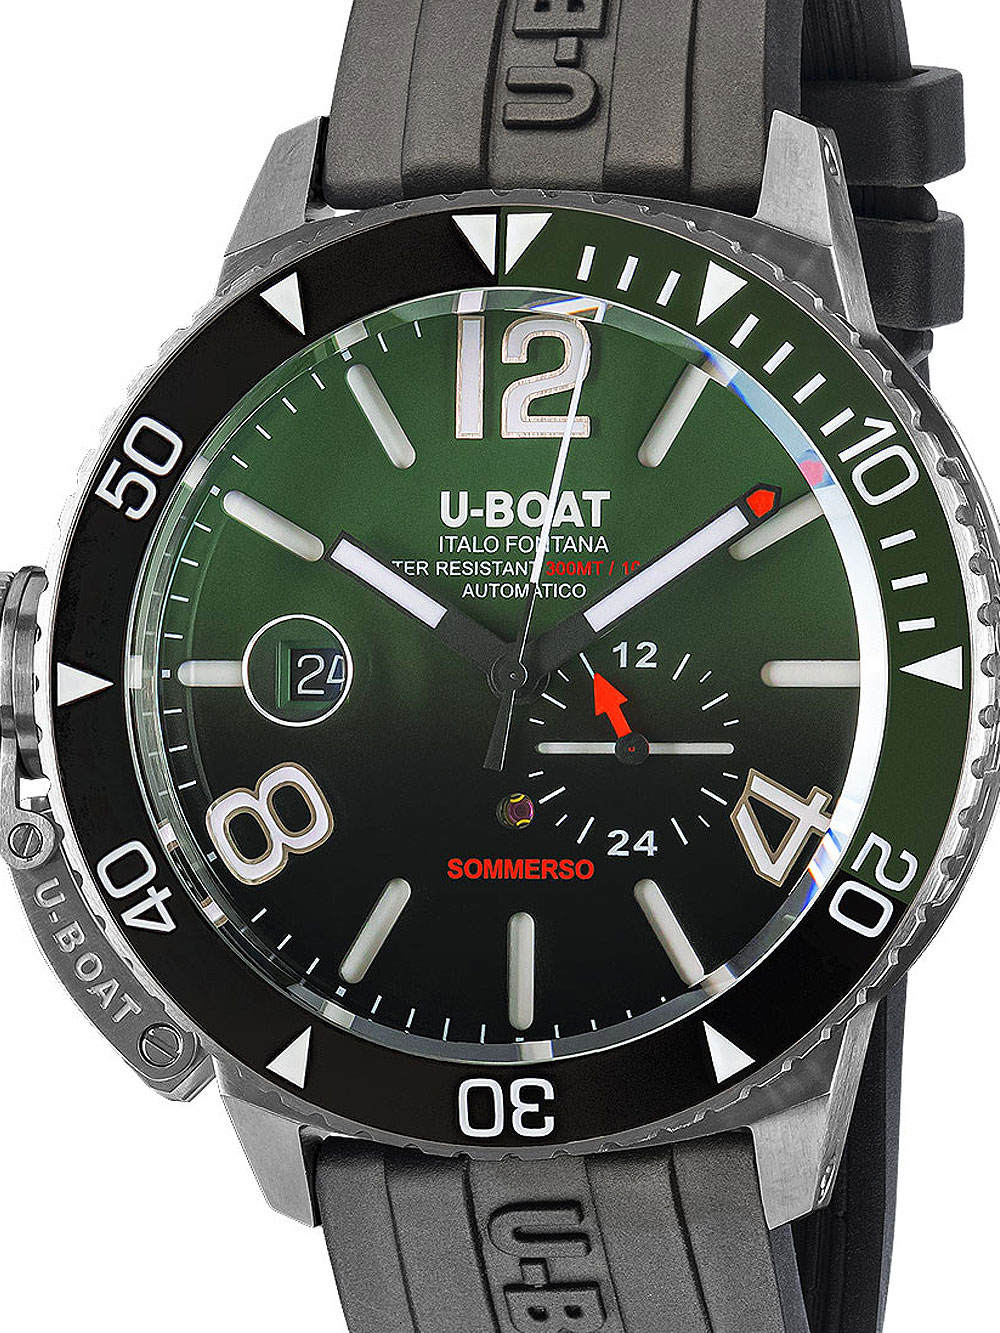 U-Boat 9520 Sommerso Automatic Mens Watch 46mm 30ATM BY U-BOAT - Wristwatch available at DOYUF